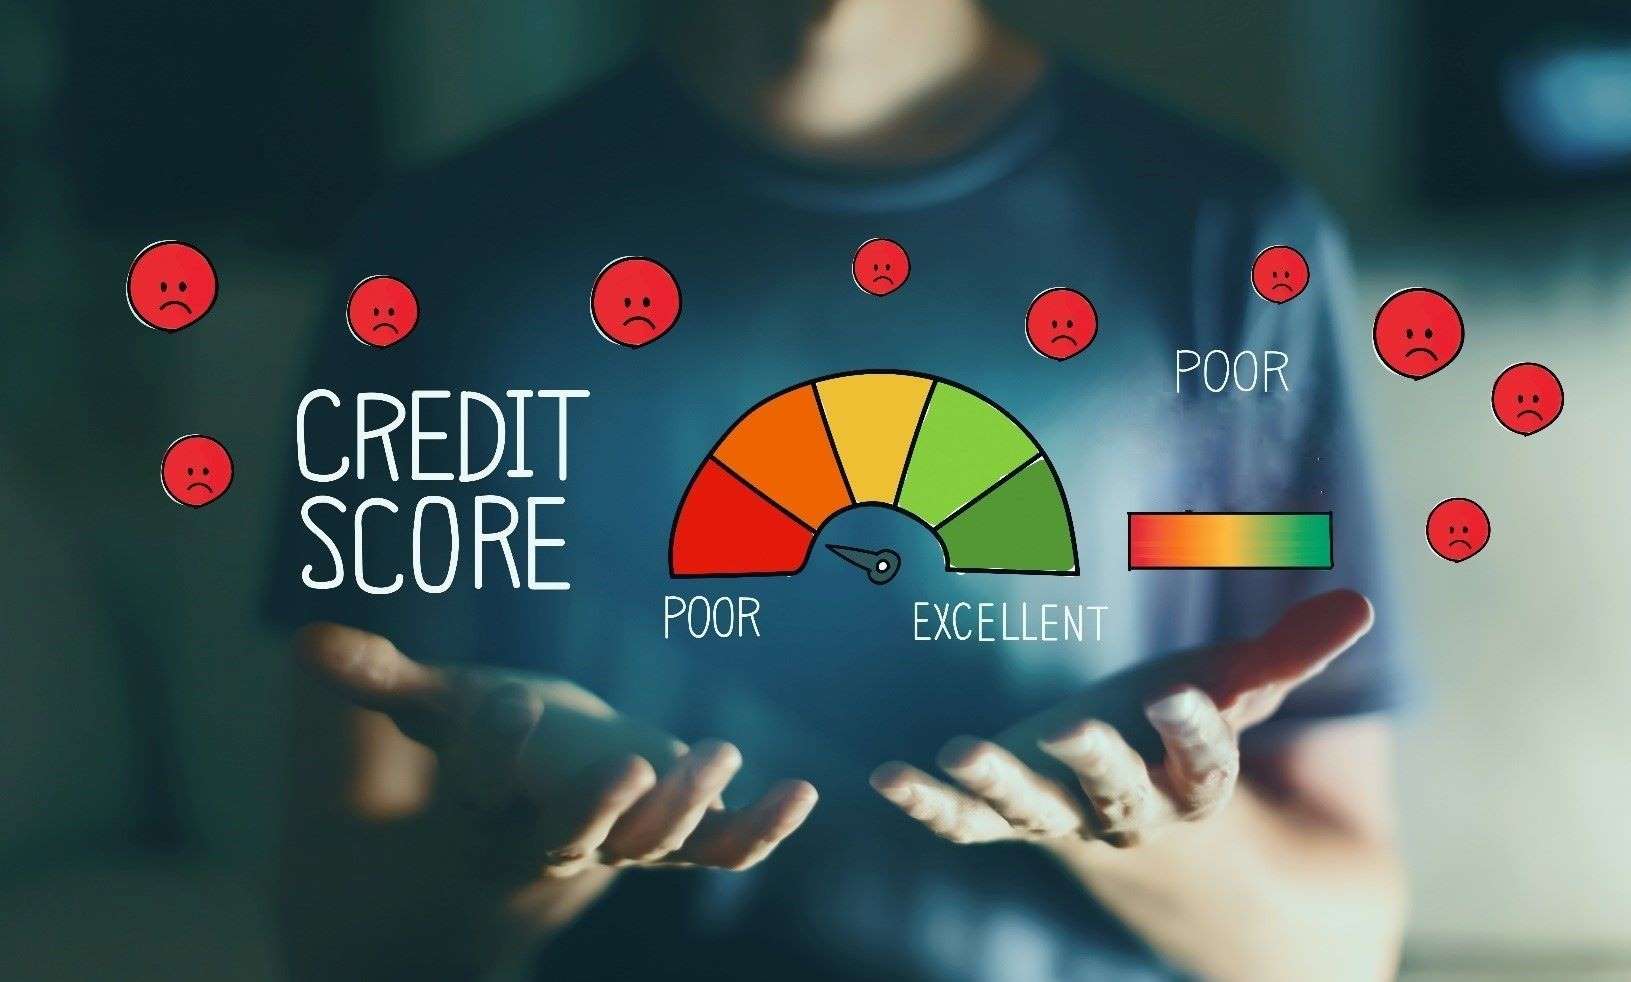 Man takes his bad credit score in his own hands